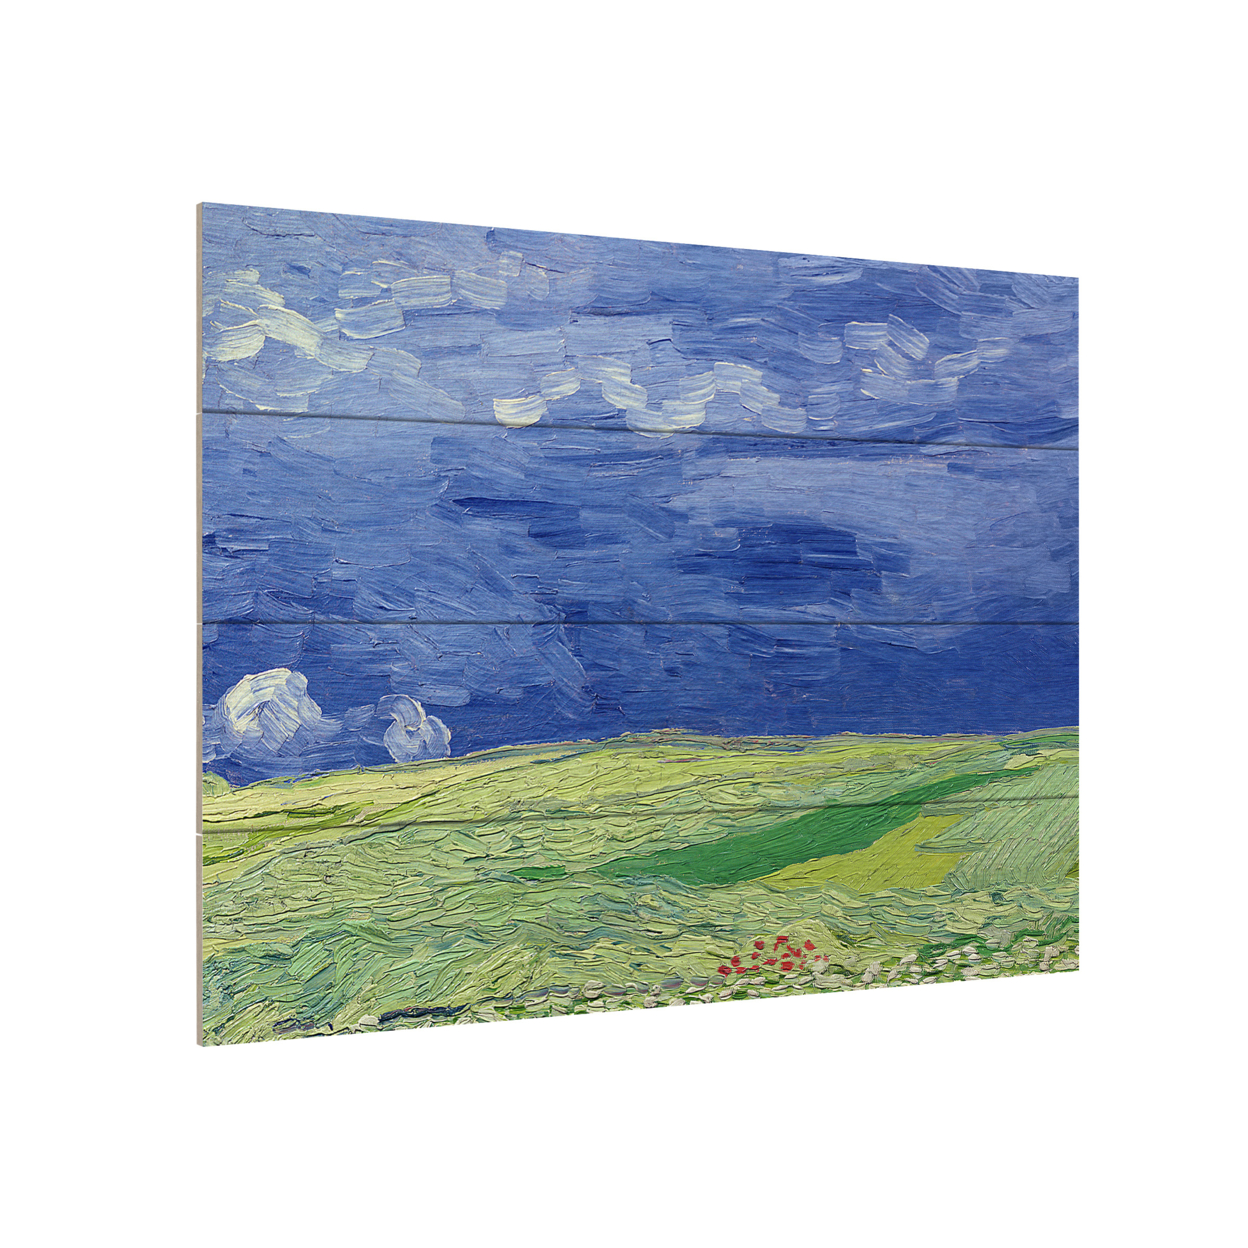 Wall Art 12 X 16 Inches Titled Wheatfields Under Thnderclouds Ready To Hang Printed On Wooden Planks